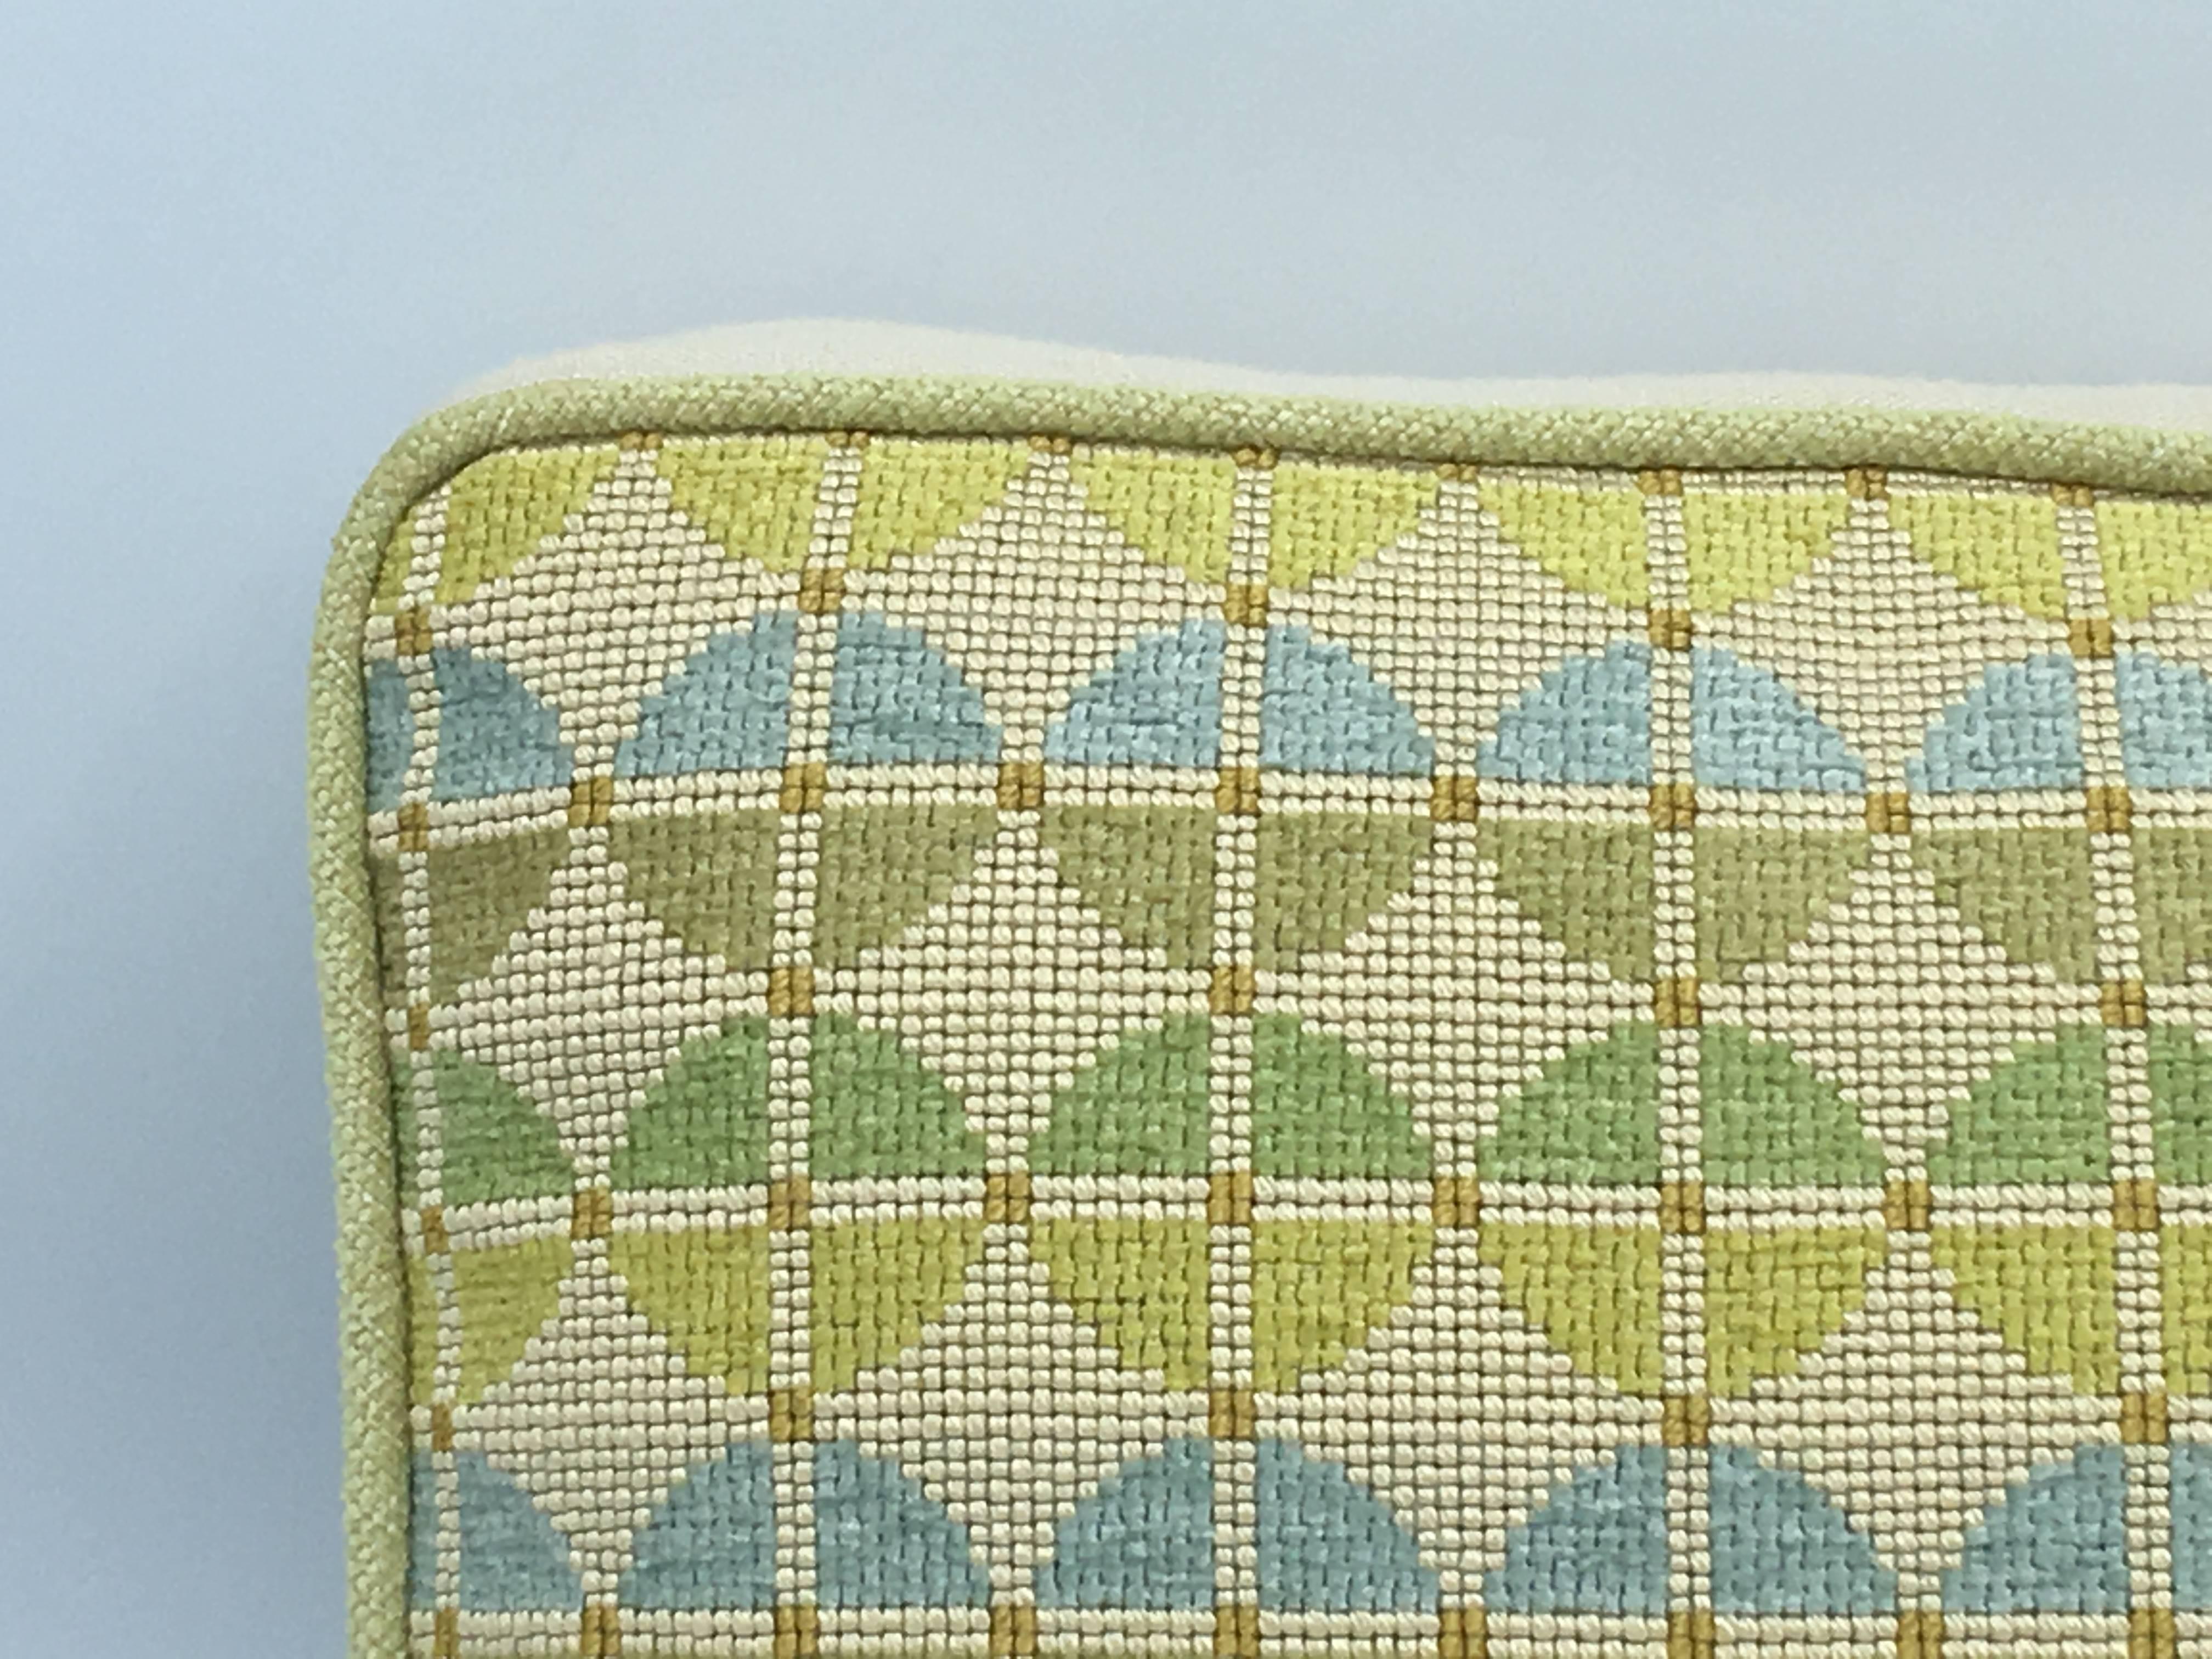 Offered is a gorgeous, 1970s geometric blue and green needlepoint pillow. Linen backing with hidden zipper closure. Down-fill insert.